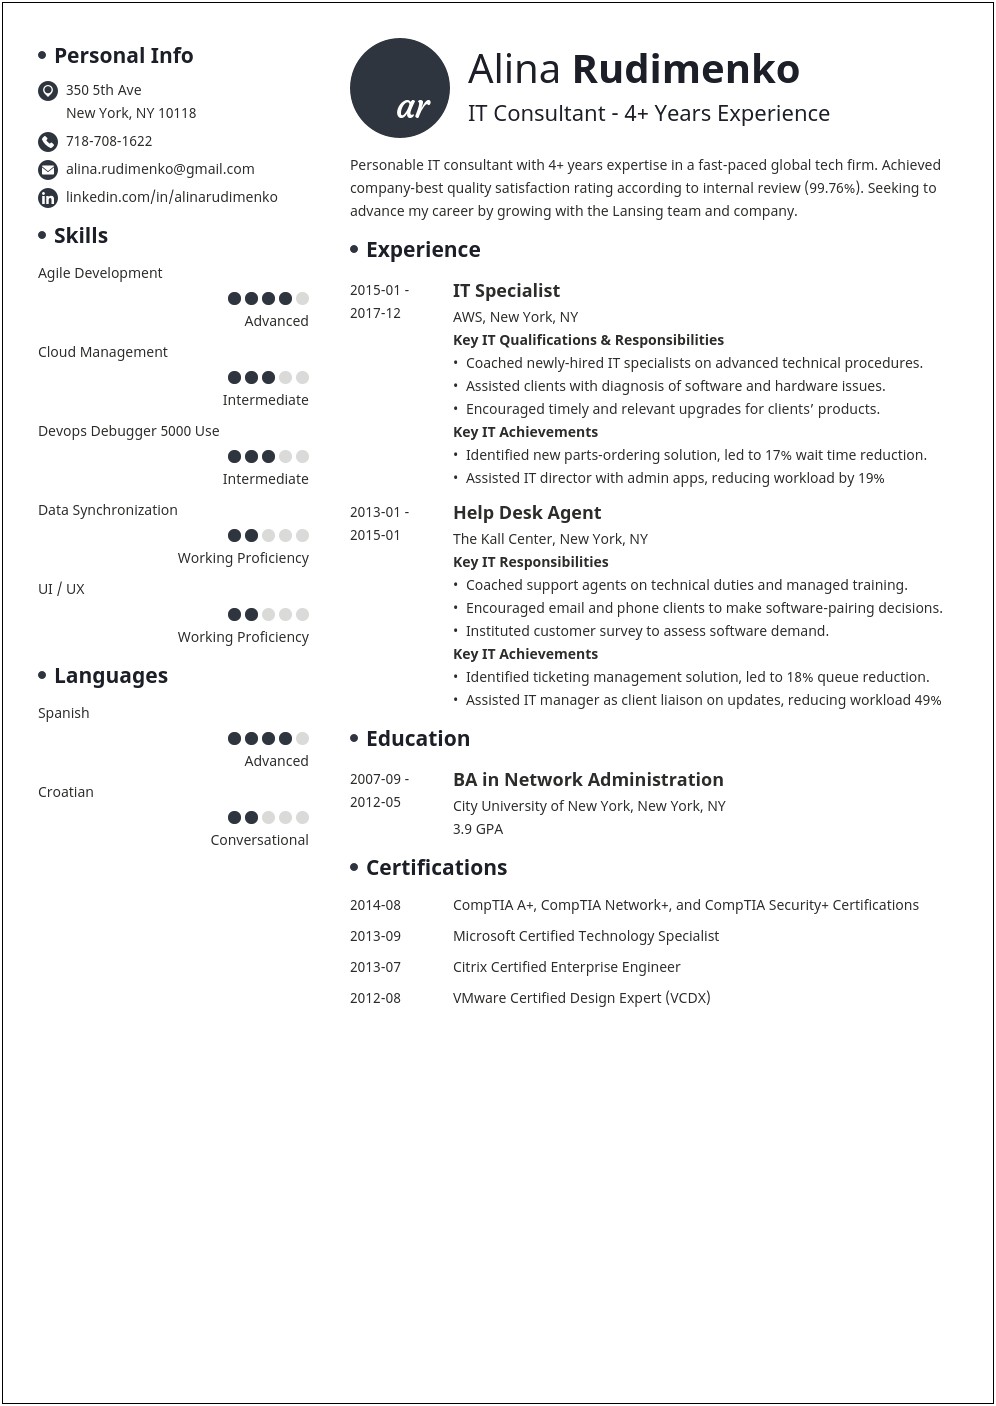 Resume Professional Profile Examples Technology